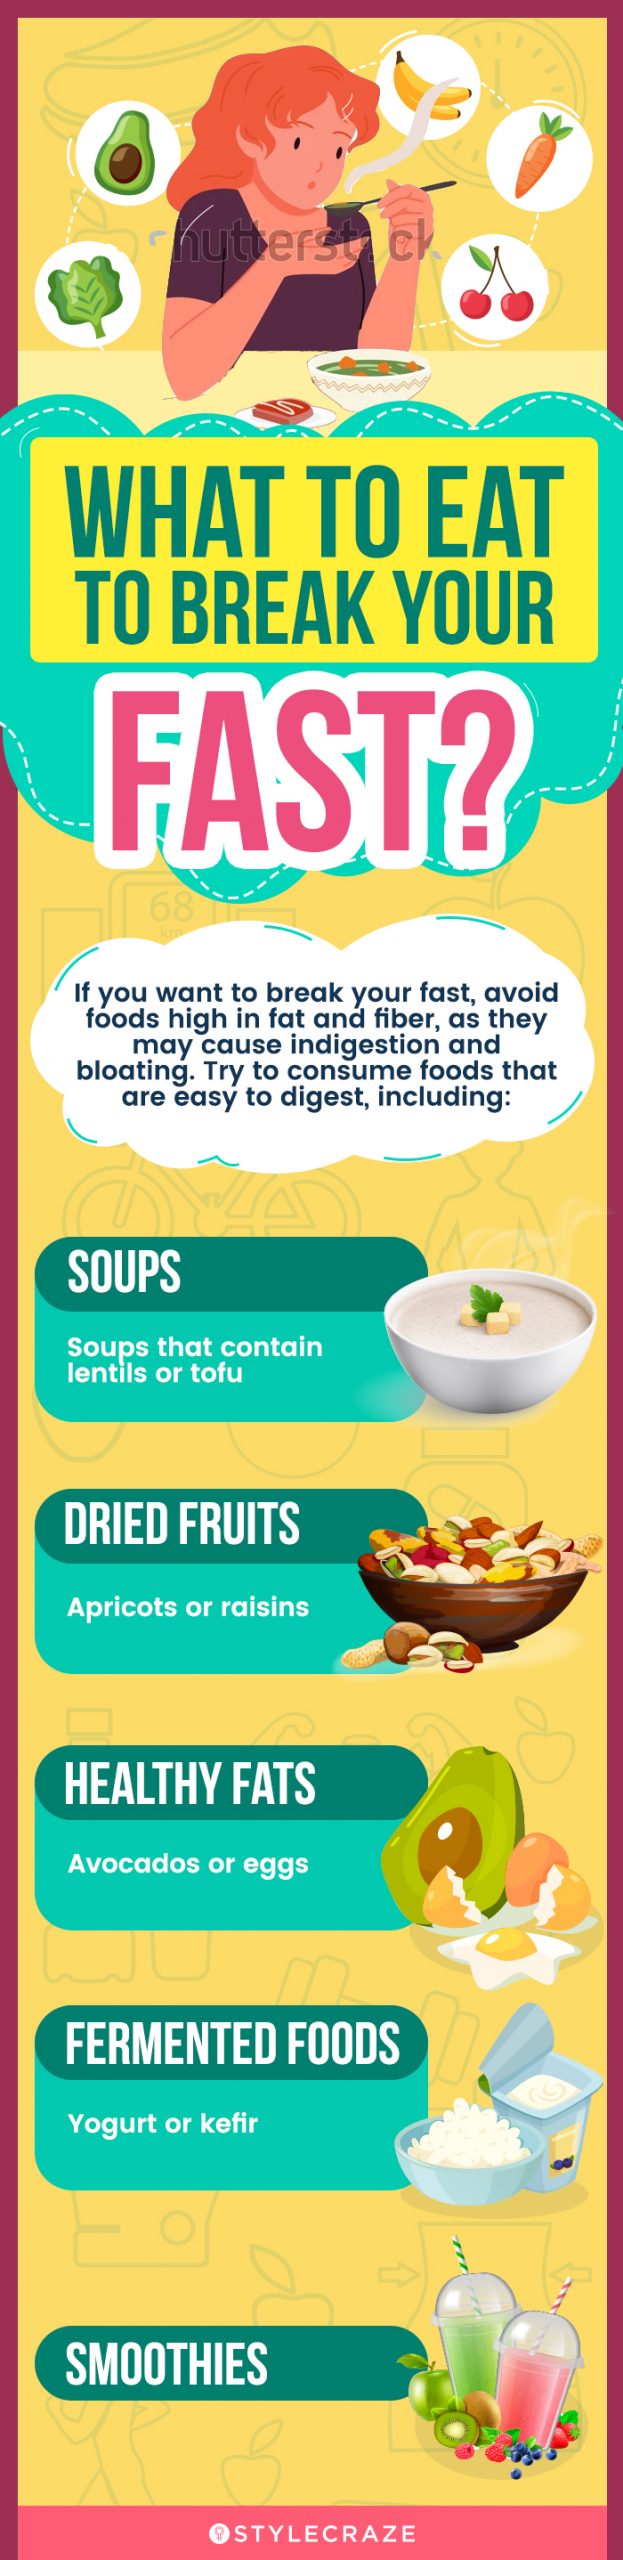 what to eat to break your fast (infographic)